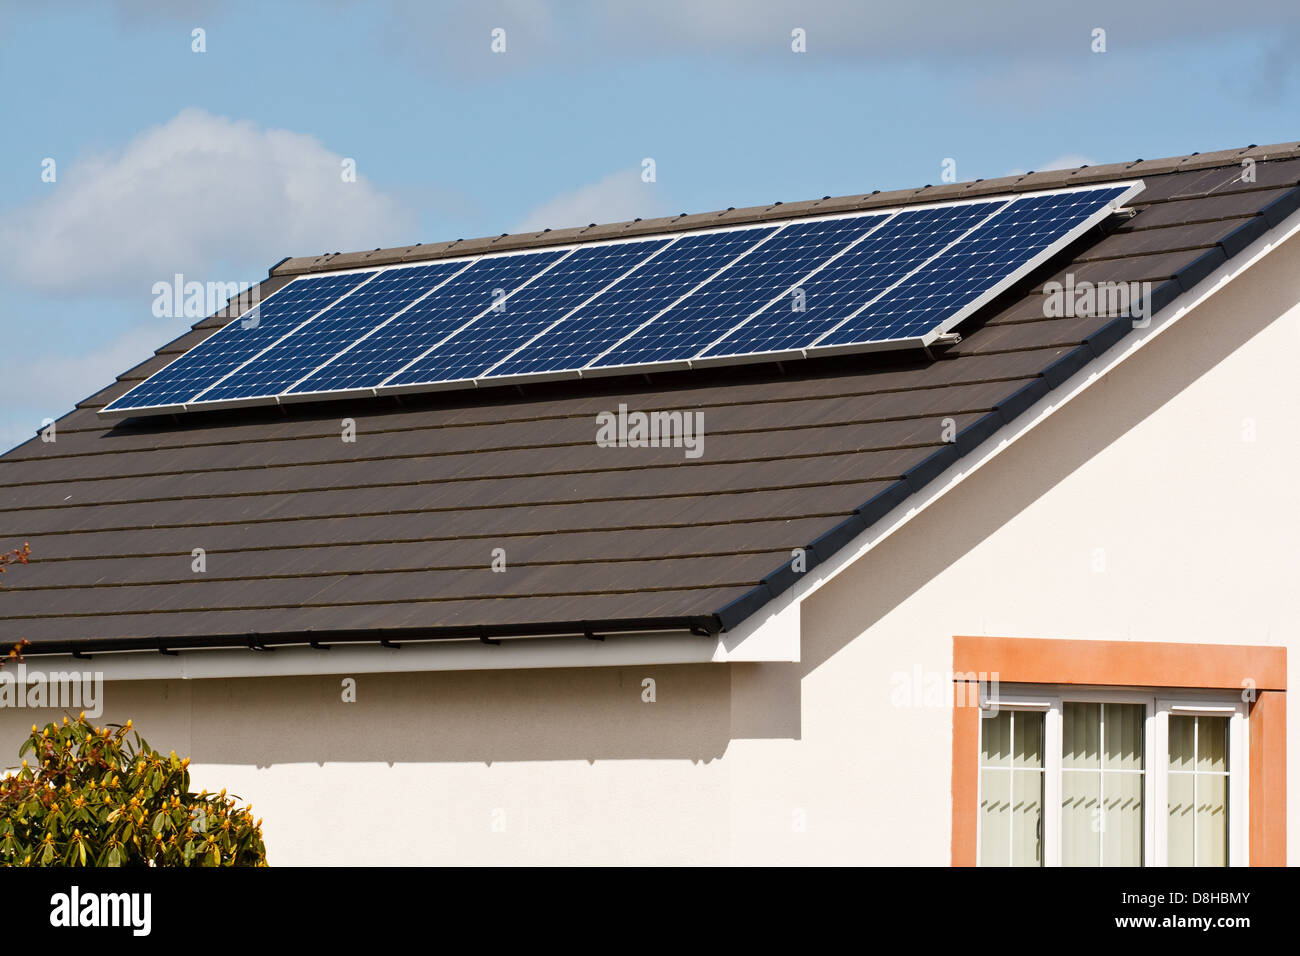 Photovoltaic Solar panels Mounted on a new tile roof of a modern home Stock Photo